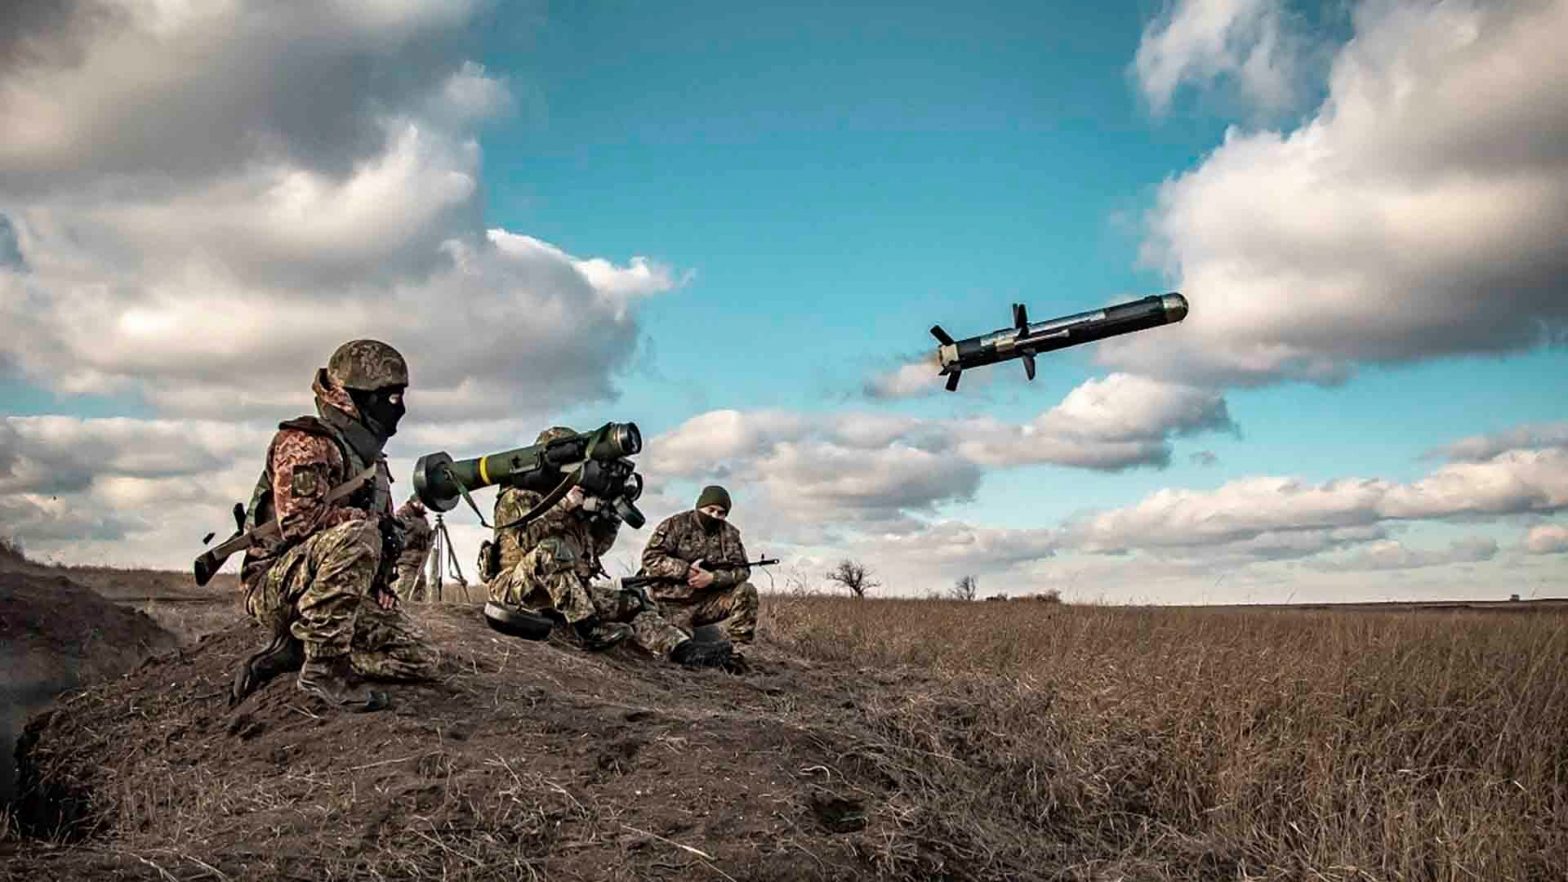 Patriot Systems and Ukrainian Defense: Analyzing Volodymyr Zelensky’s Request for Increased Military Aid